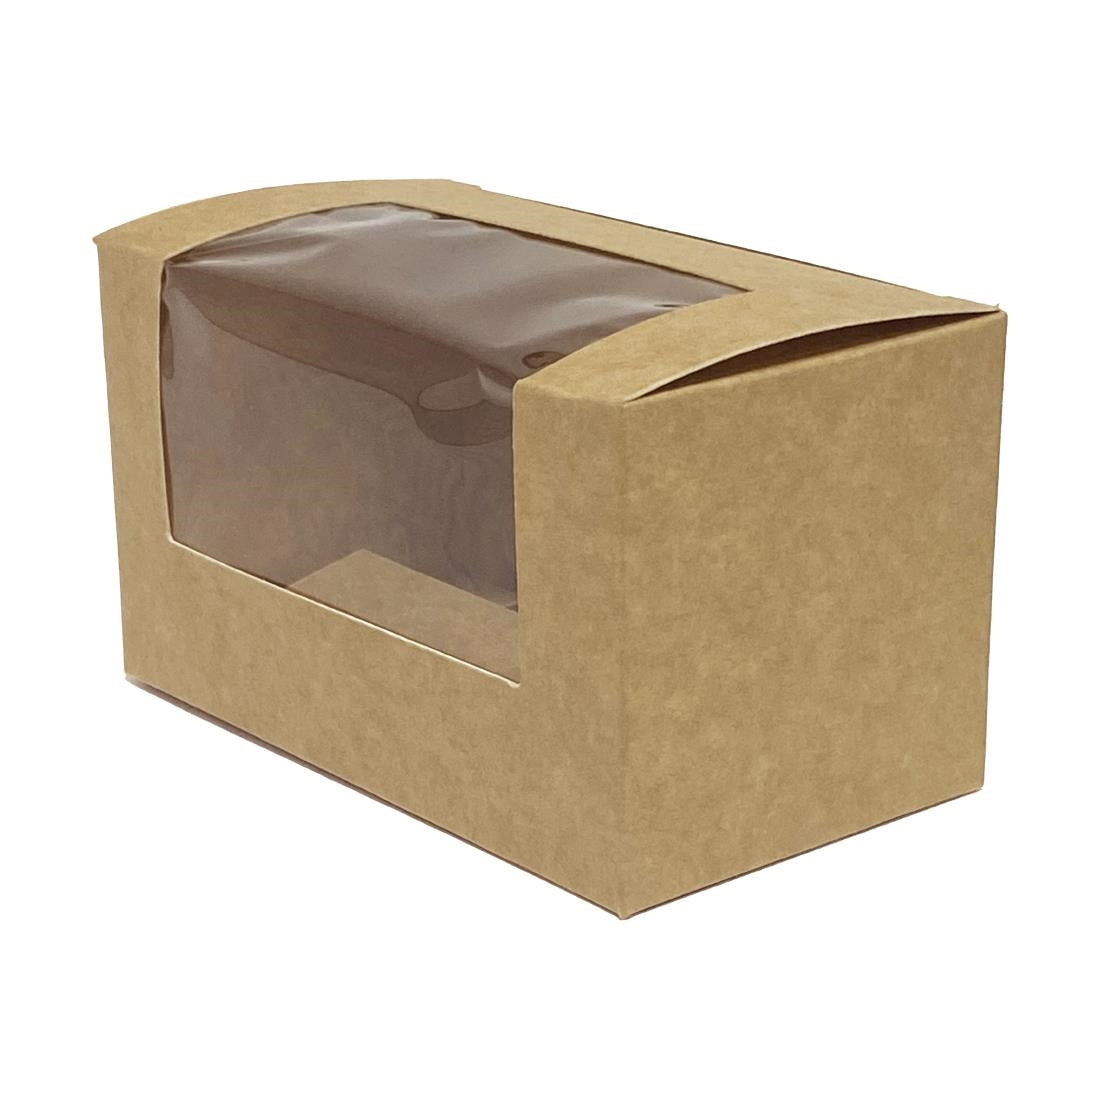 FT652 Fiesta Recyclable Bloomer Box with PET Window 70x125mm (Pack of 500) JD Catering Equipment Solutions Ltd